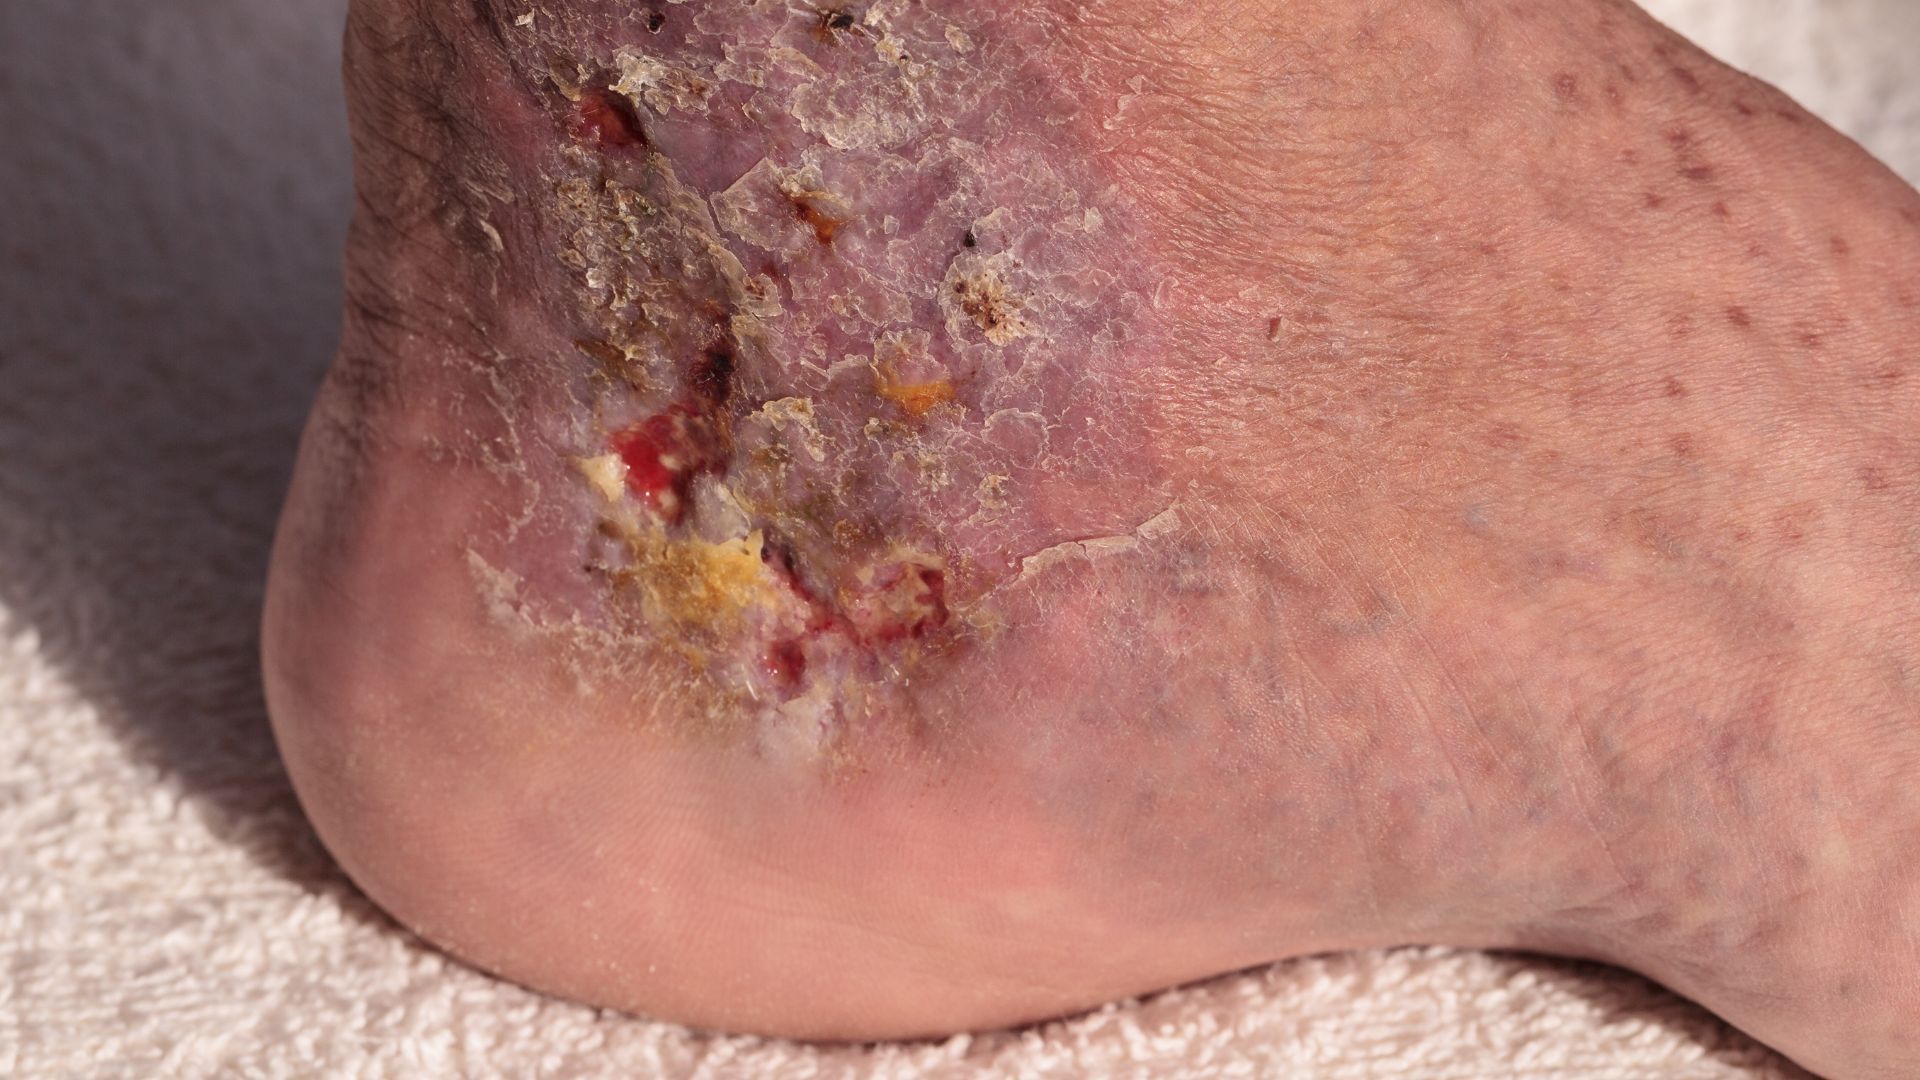 All You Need to Know about Cellulitis